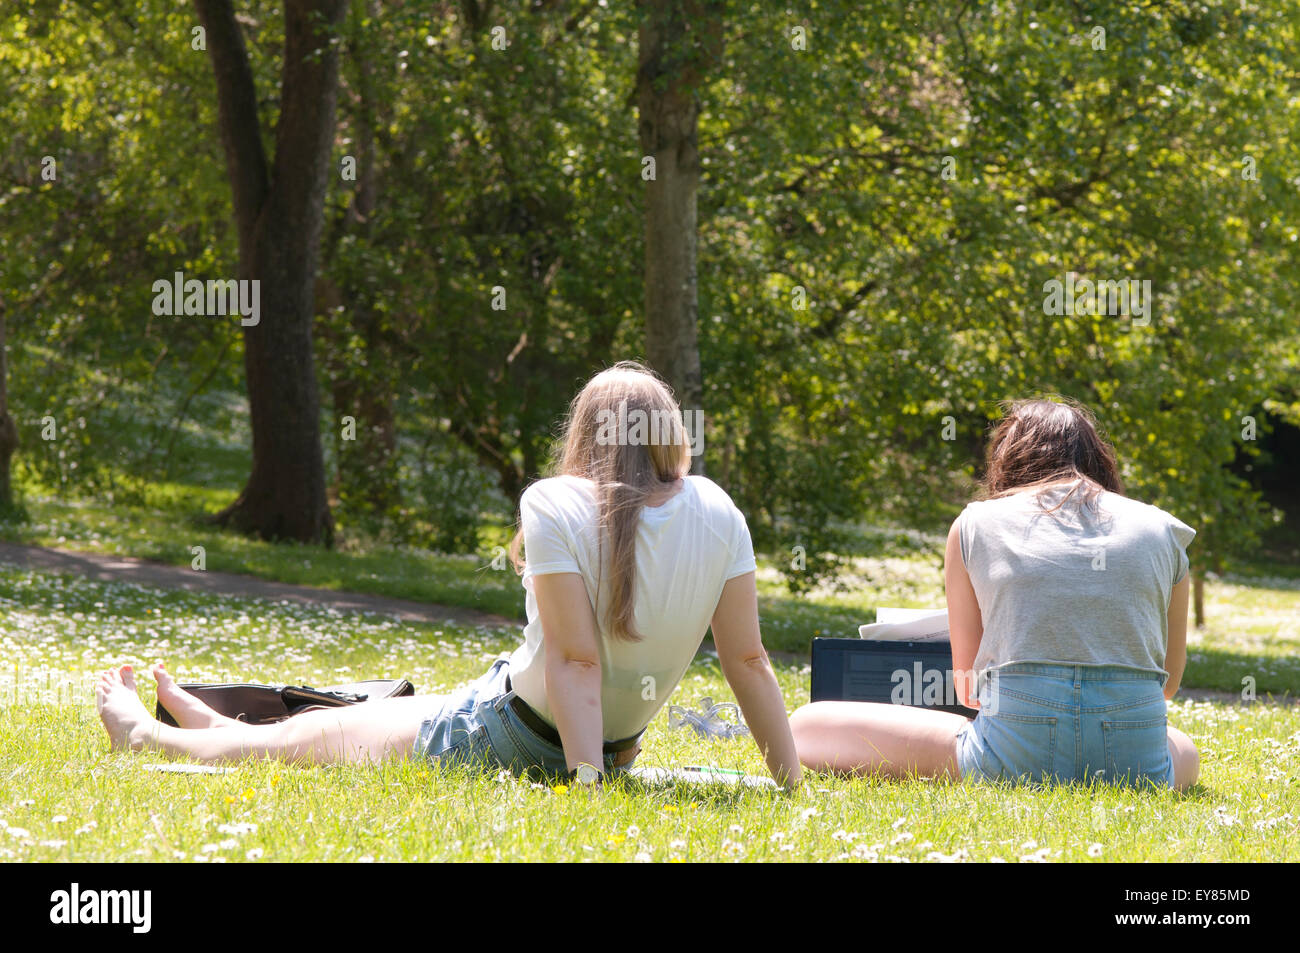 Rear view of two students sitting on the grass studying Stock Photo